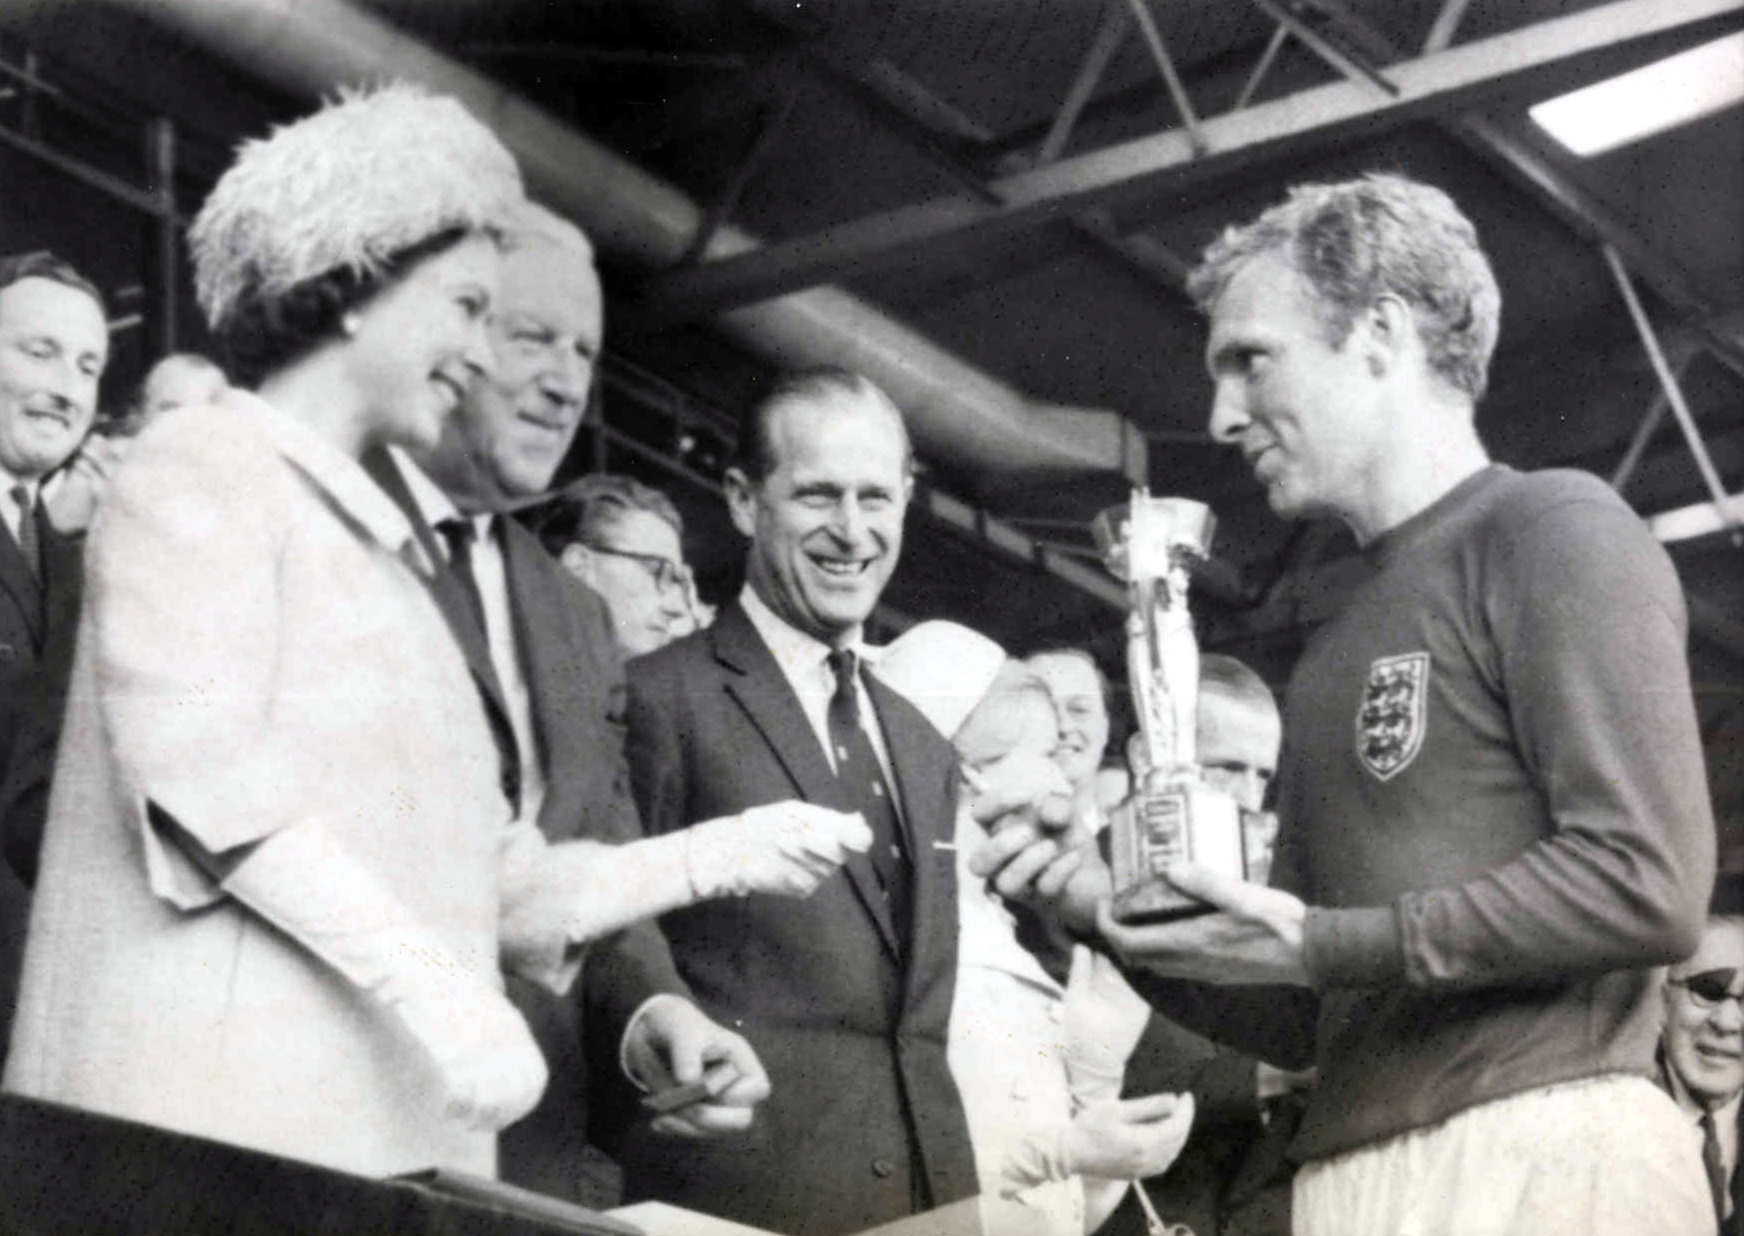 The Queen presents Bobby Moore with the World Cup